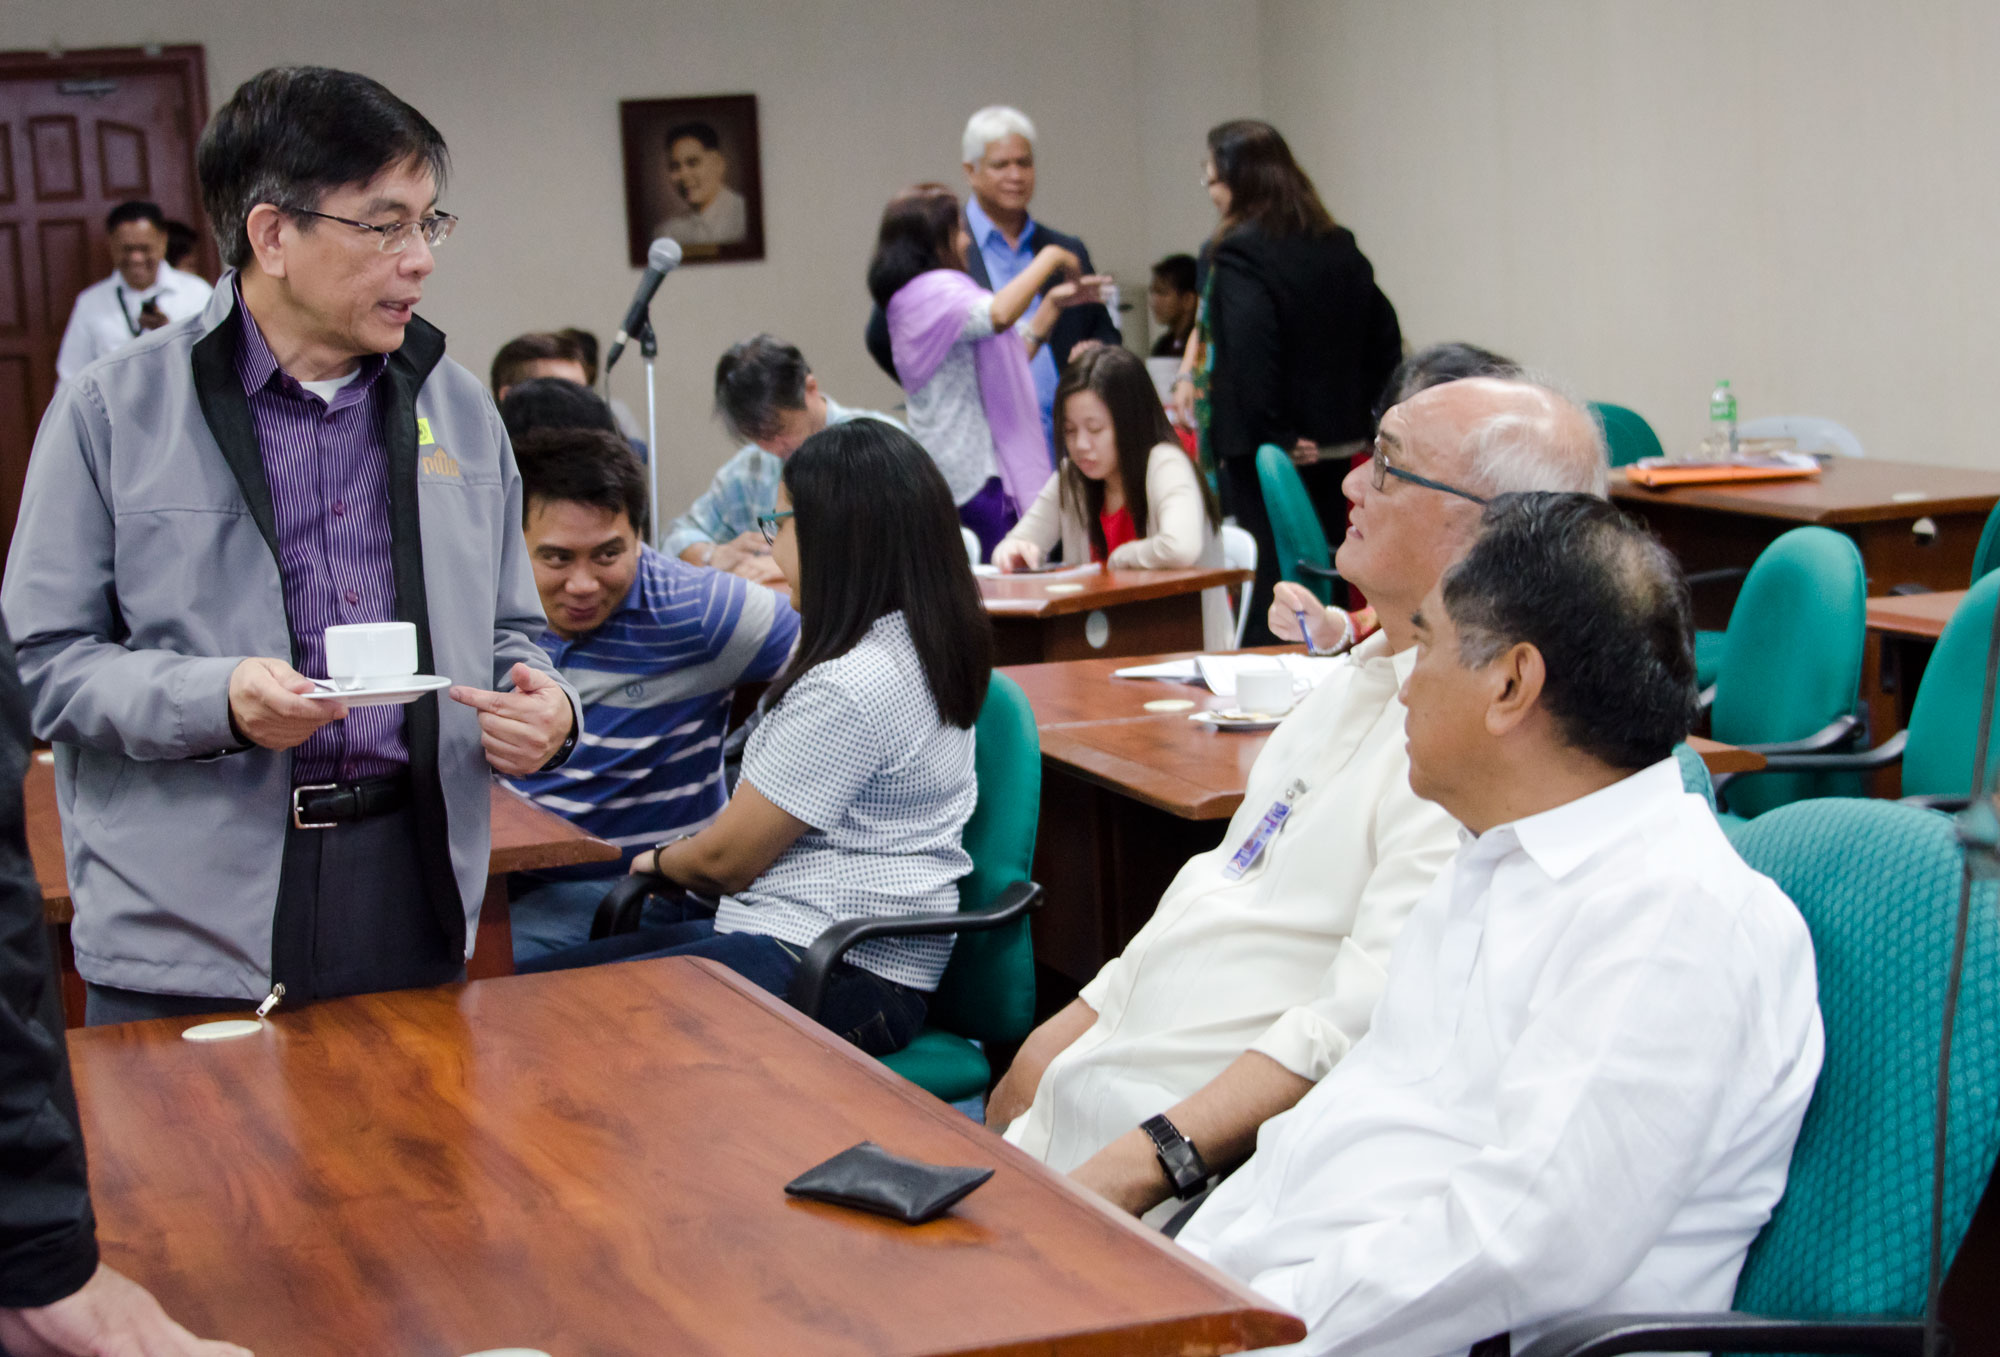 Senate Centennial Lecture Series “Assessment of the Bottom-up Budgeting Process for FY 2015-ggm_7840.jpg